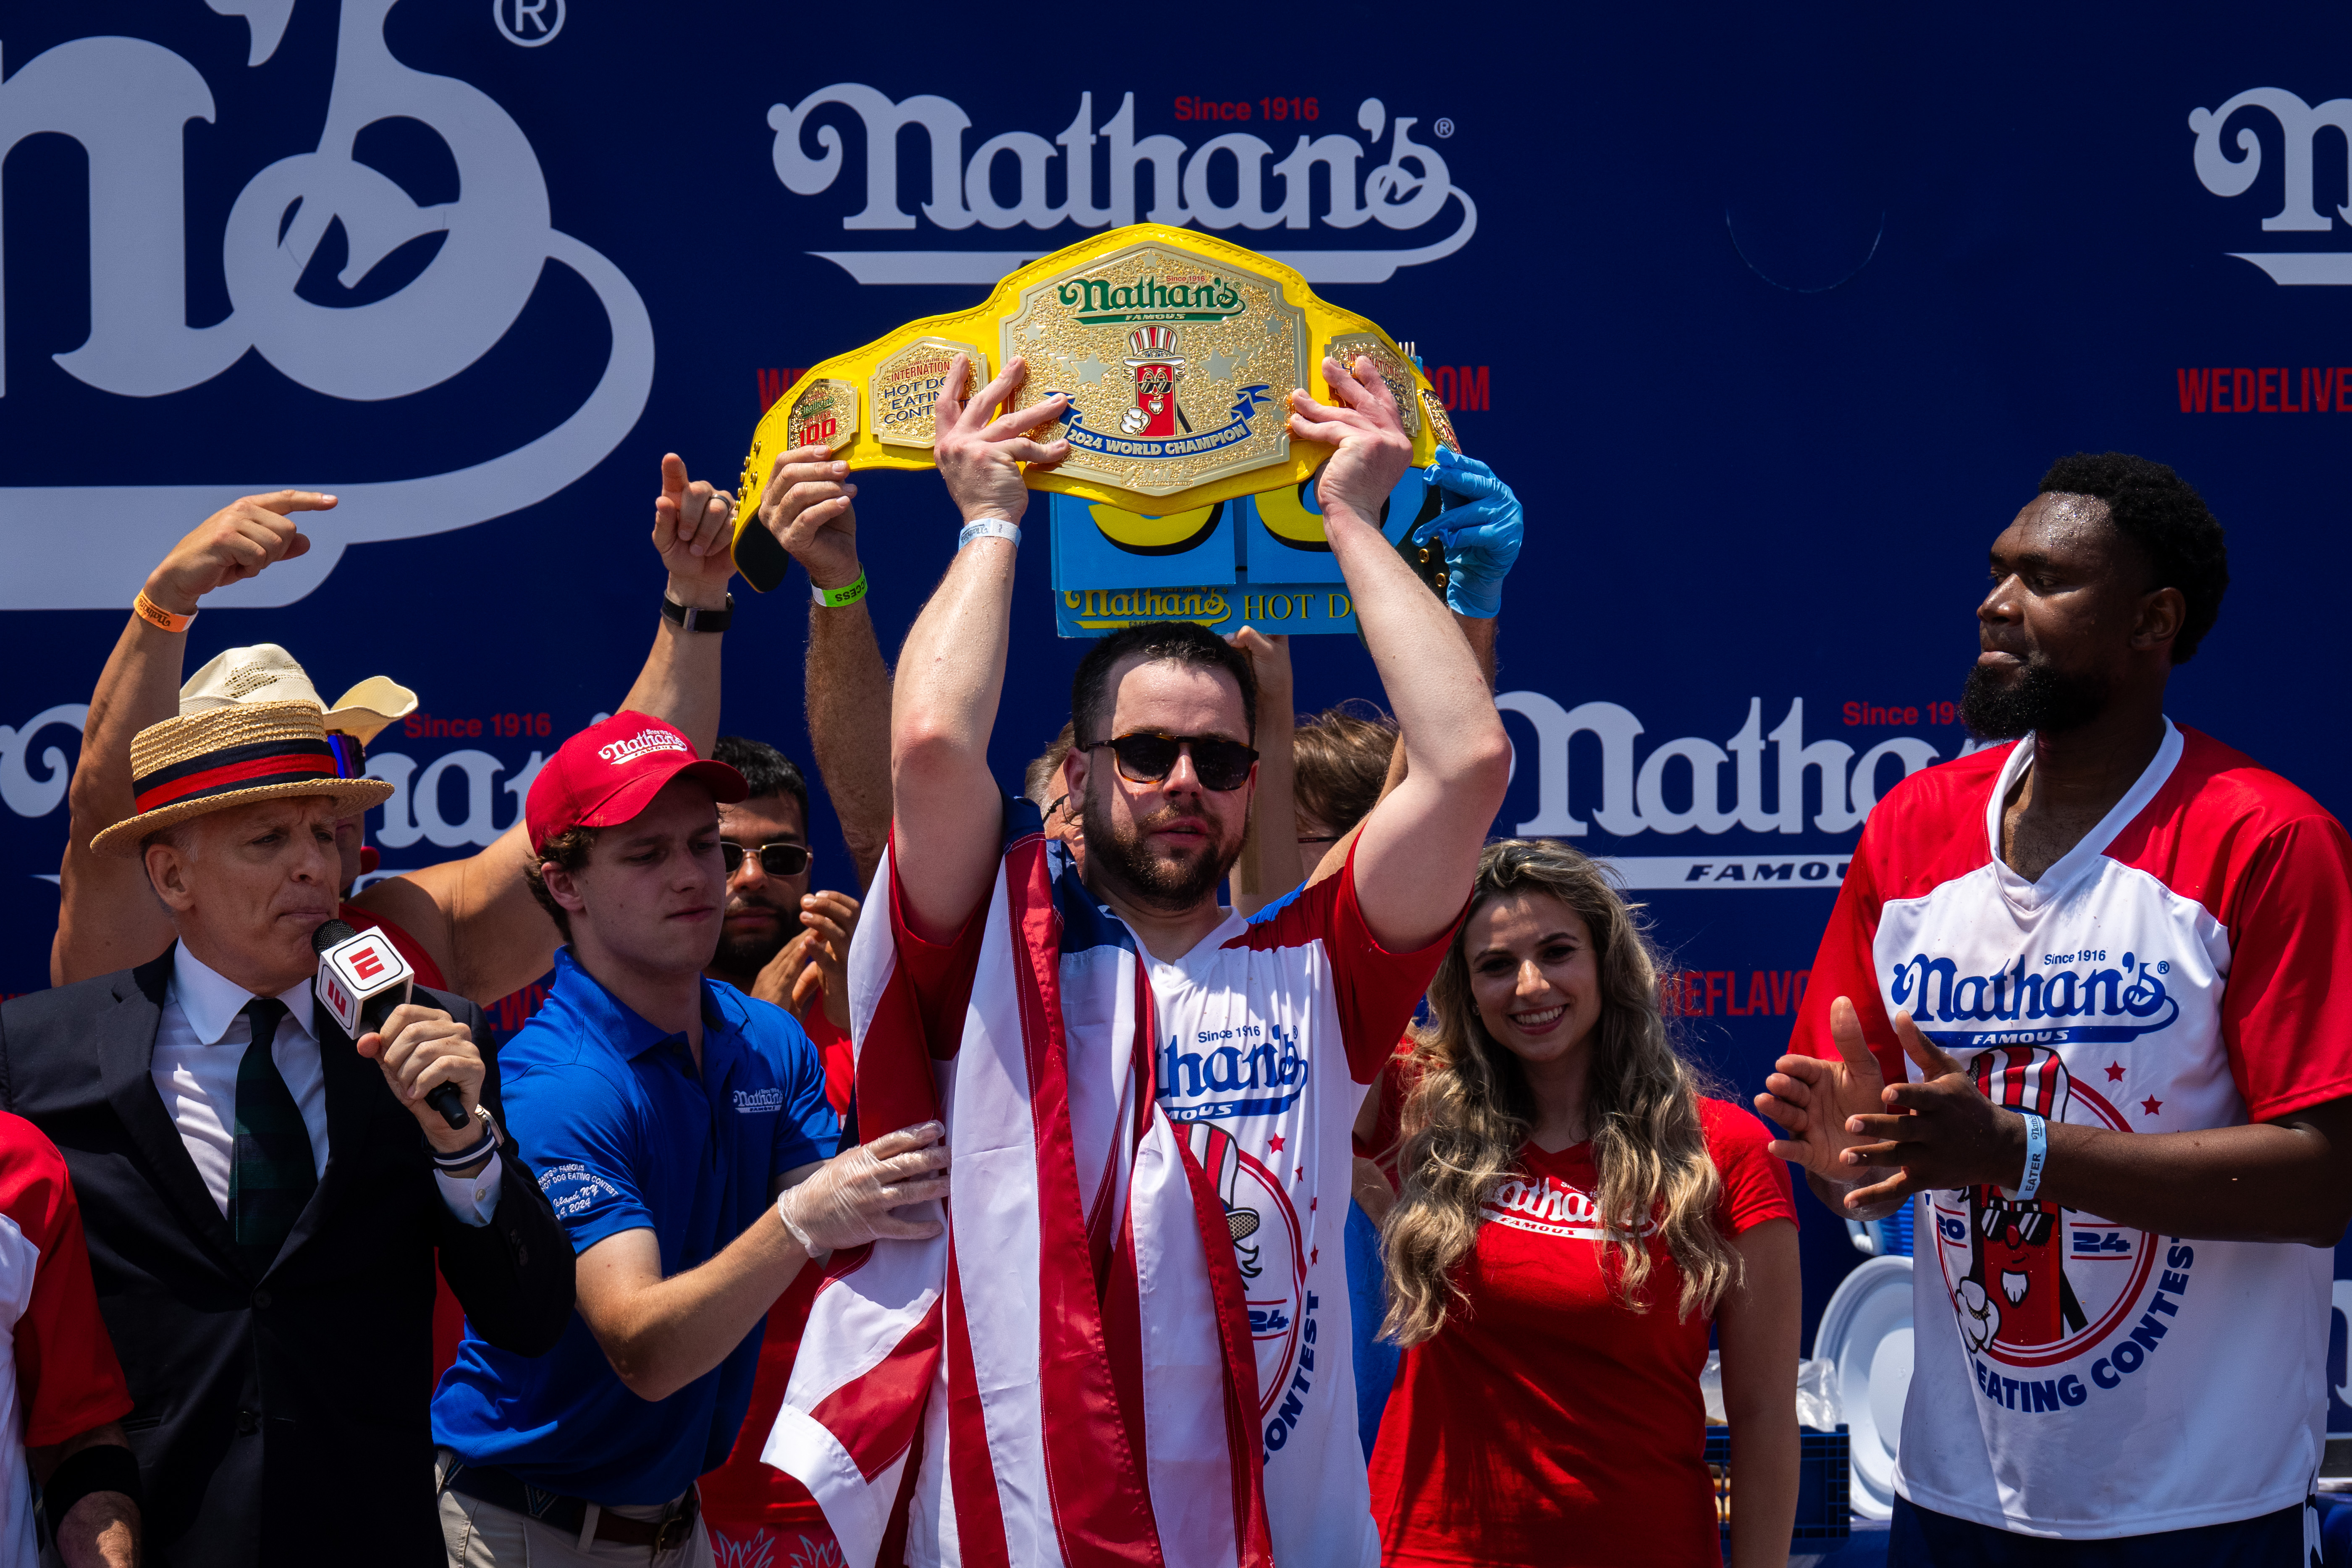 NEW YORK, NEW YORK - JULY 4: Patrick Bertoletti wins the mens title with 58 hotdogs at Nathan's Annual Hot Dog Eating Contest on July 4, 2024 in New York City. Sixteen-time winner Joey Chestnut is banned from this year's contest due to his partnership with Nathan's competitor Impossible Foods, which sells plant-based hot dogs. (Photo by Adam Gray/Getty Images)